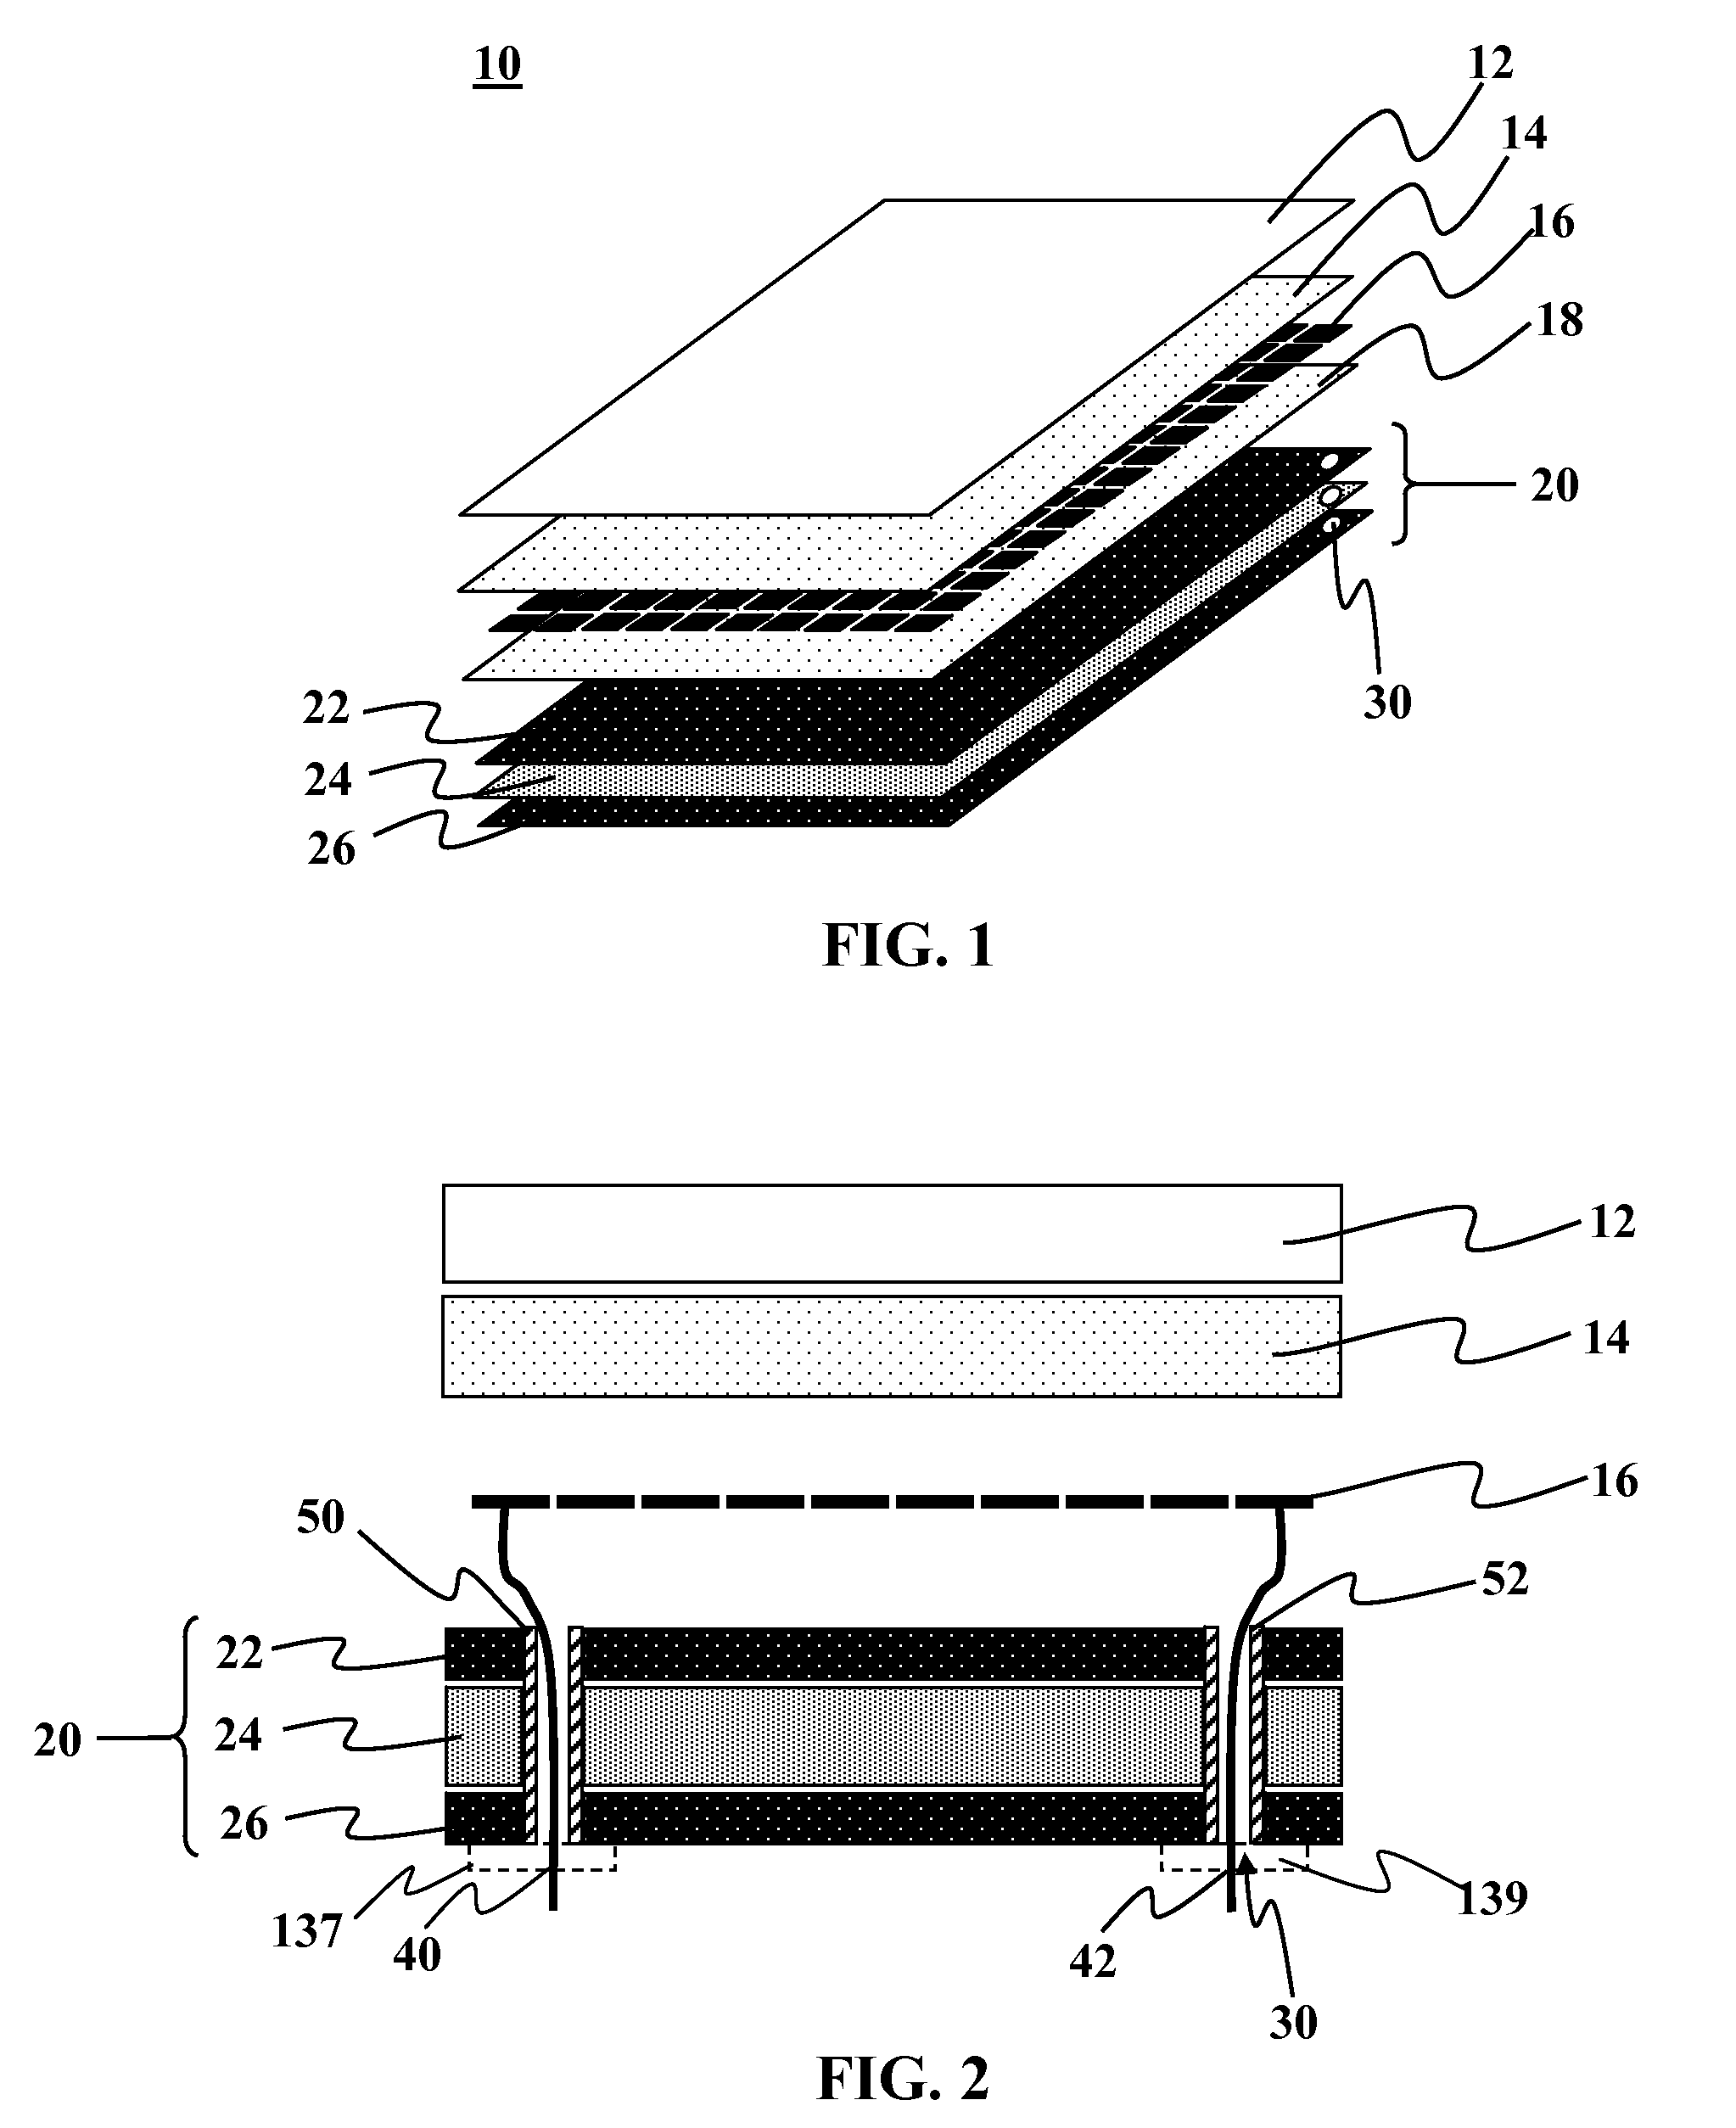 Methods and Devices for Large-Scale Solar Installations